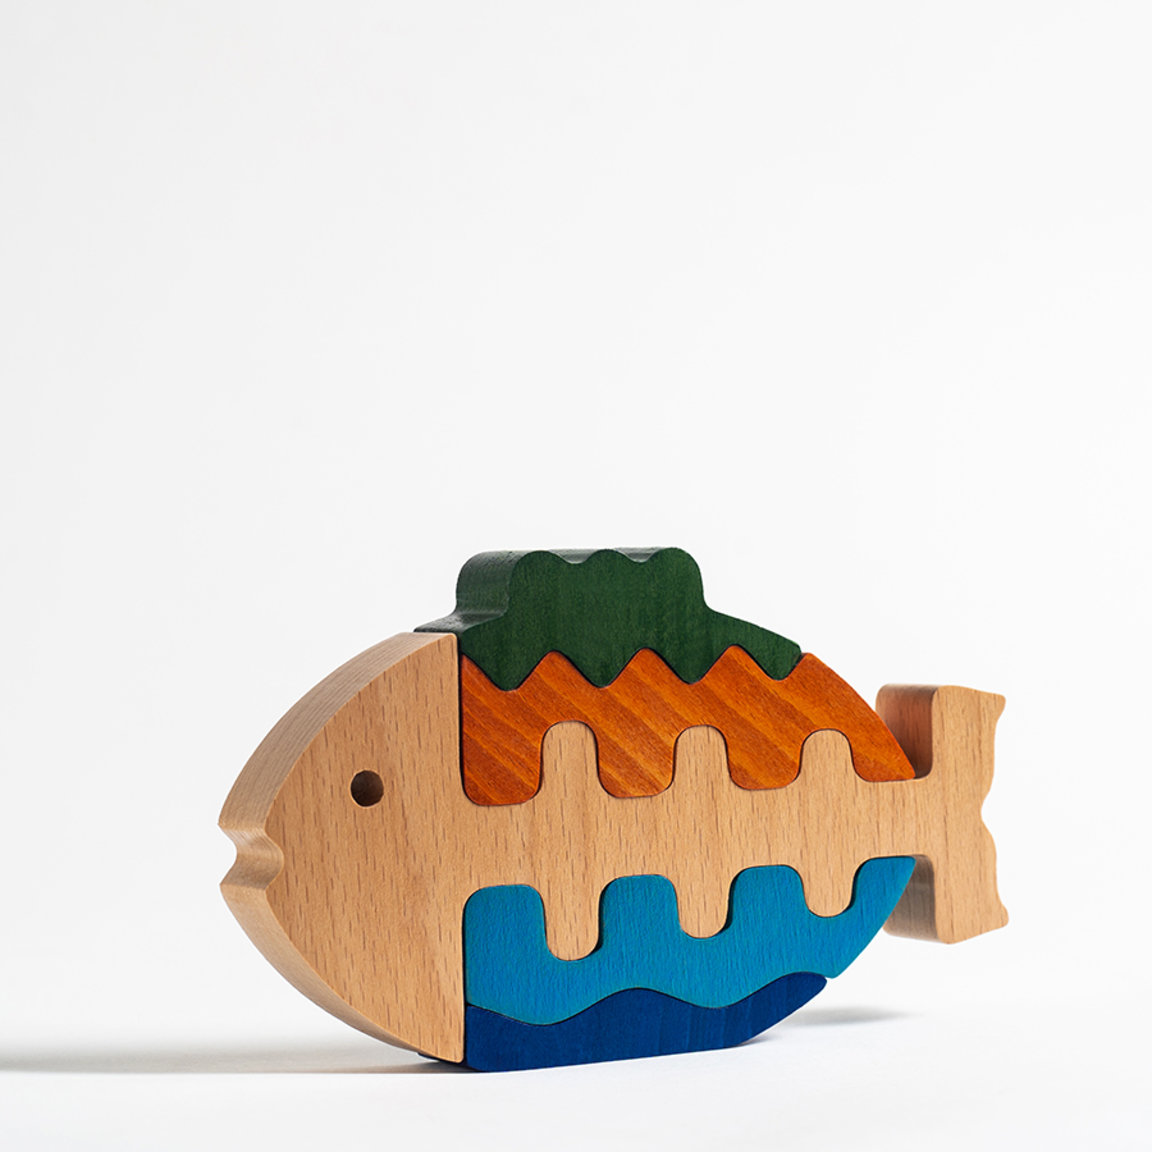 Wooden puzzle "Fish"